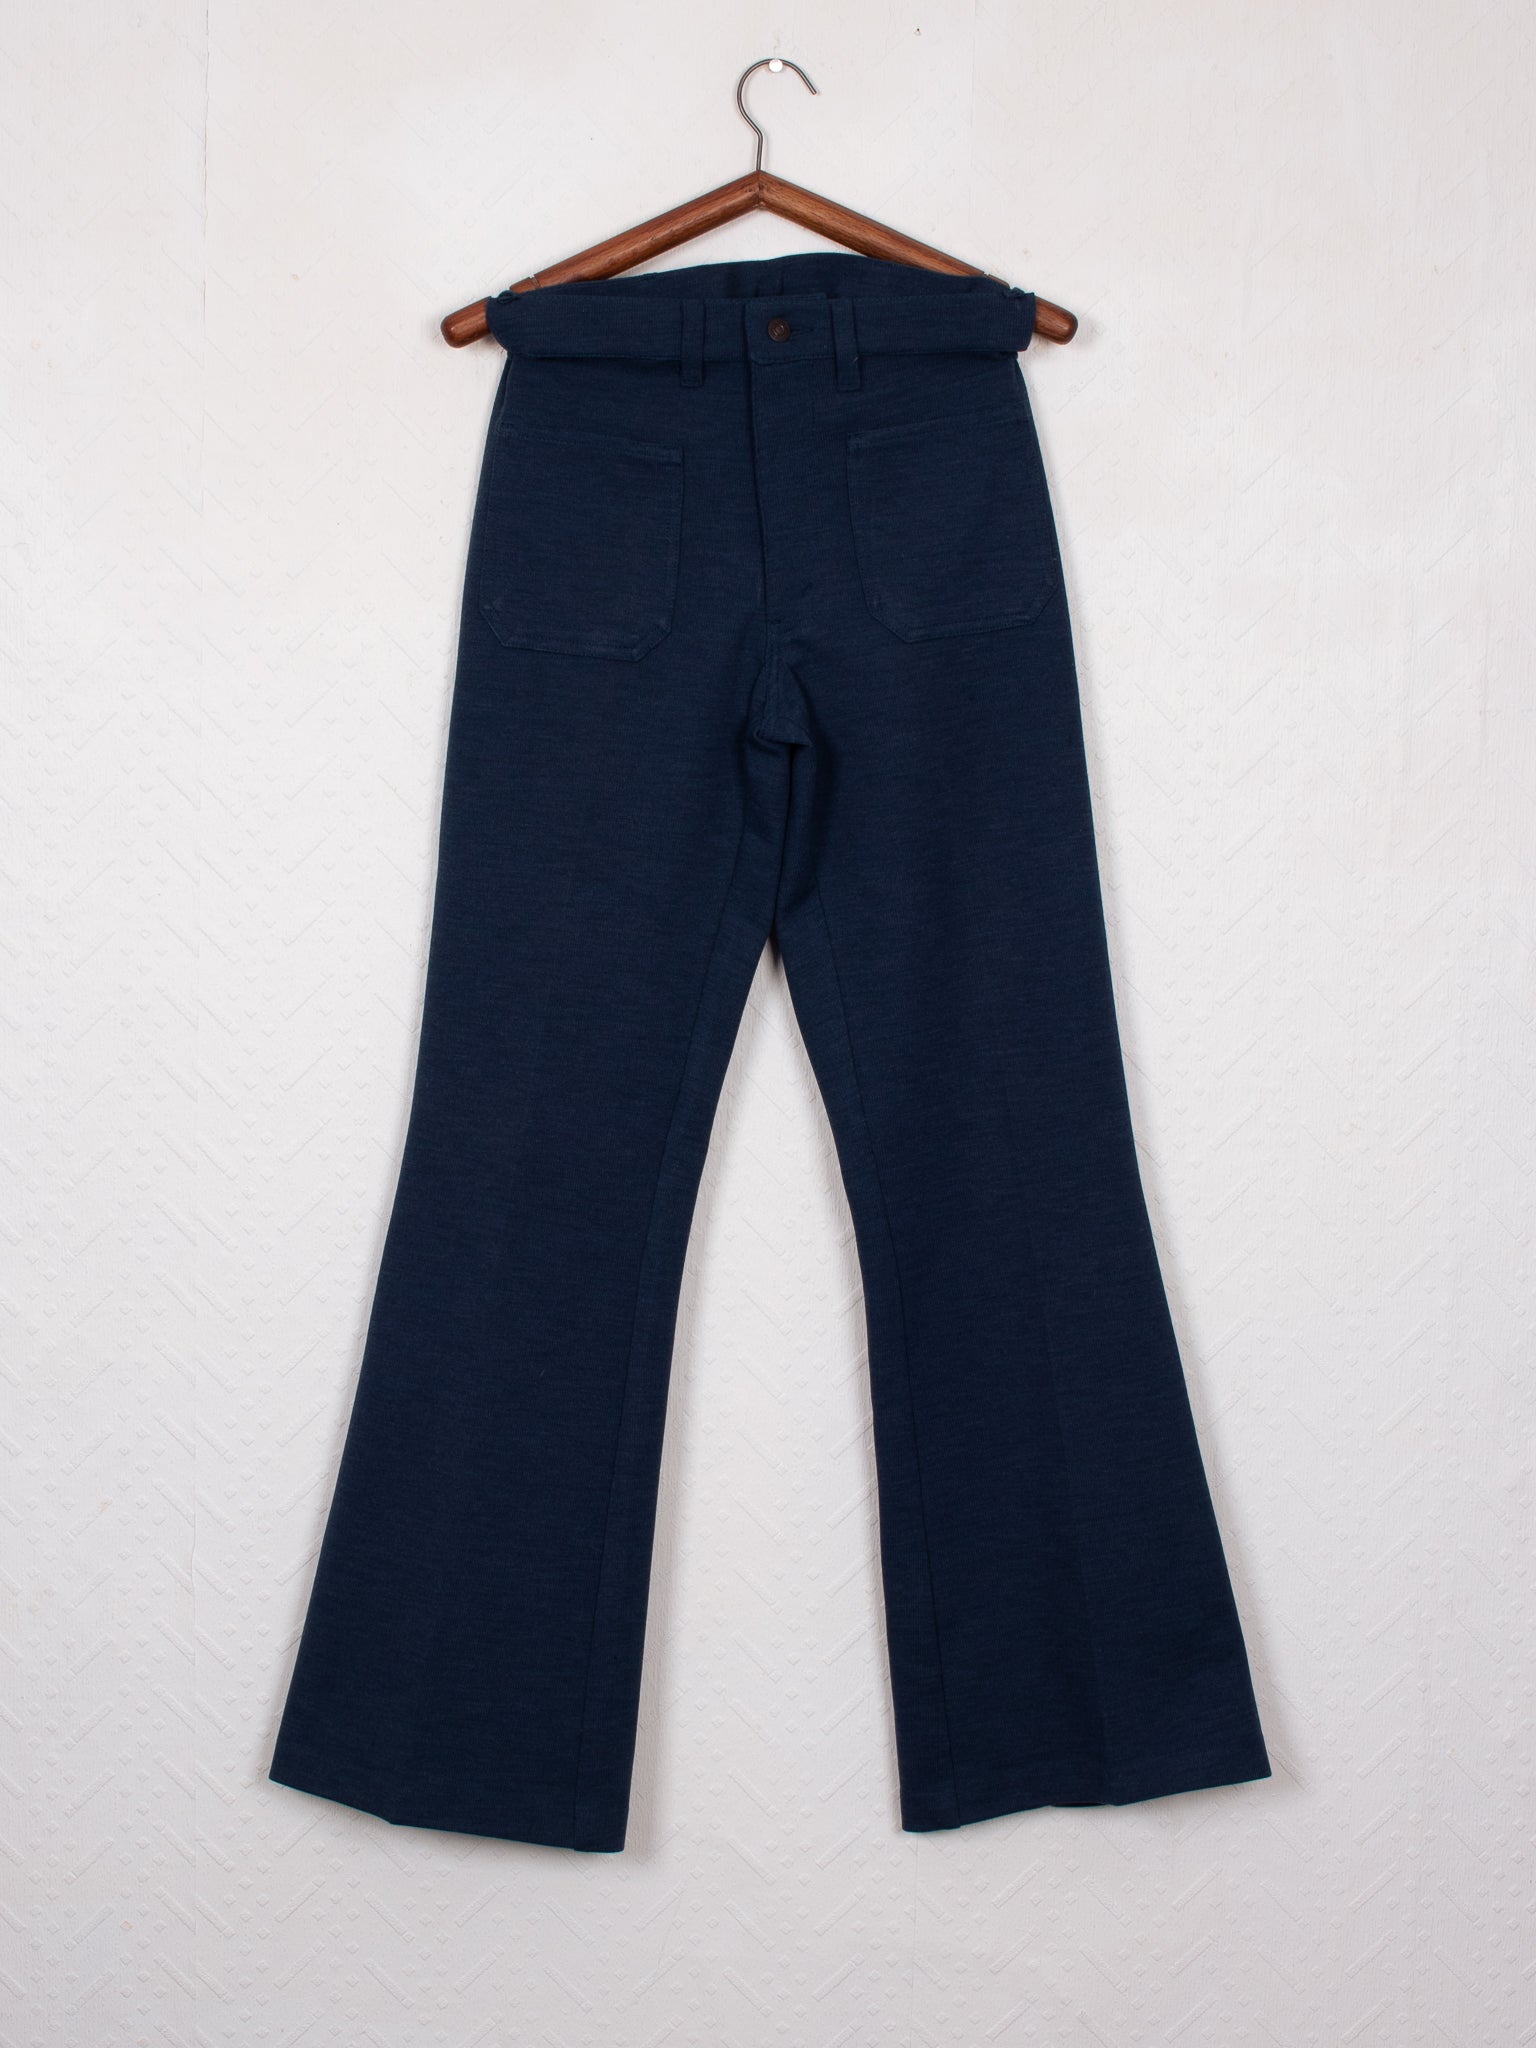 pants & trousers 70s Levi's 609 Poly-Wool flares - W32